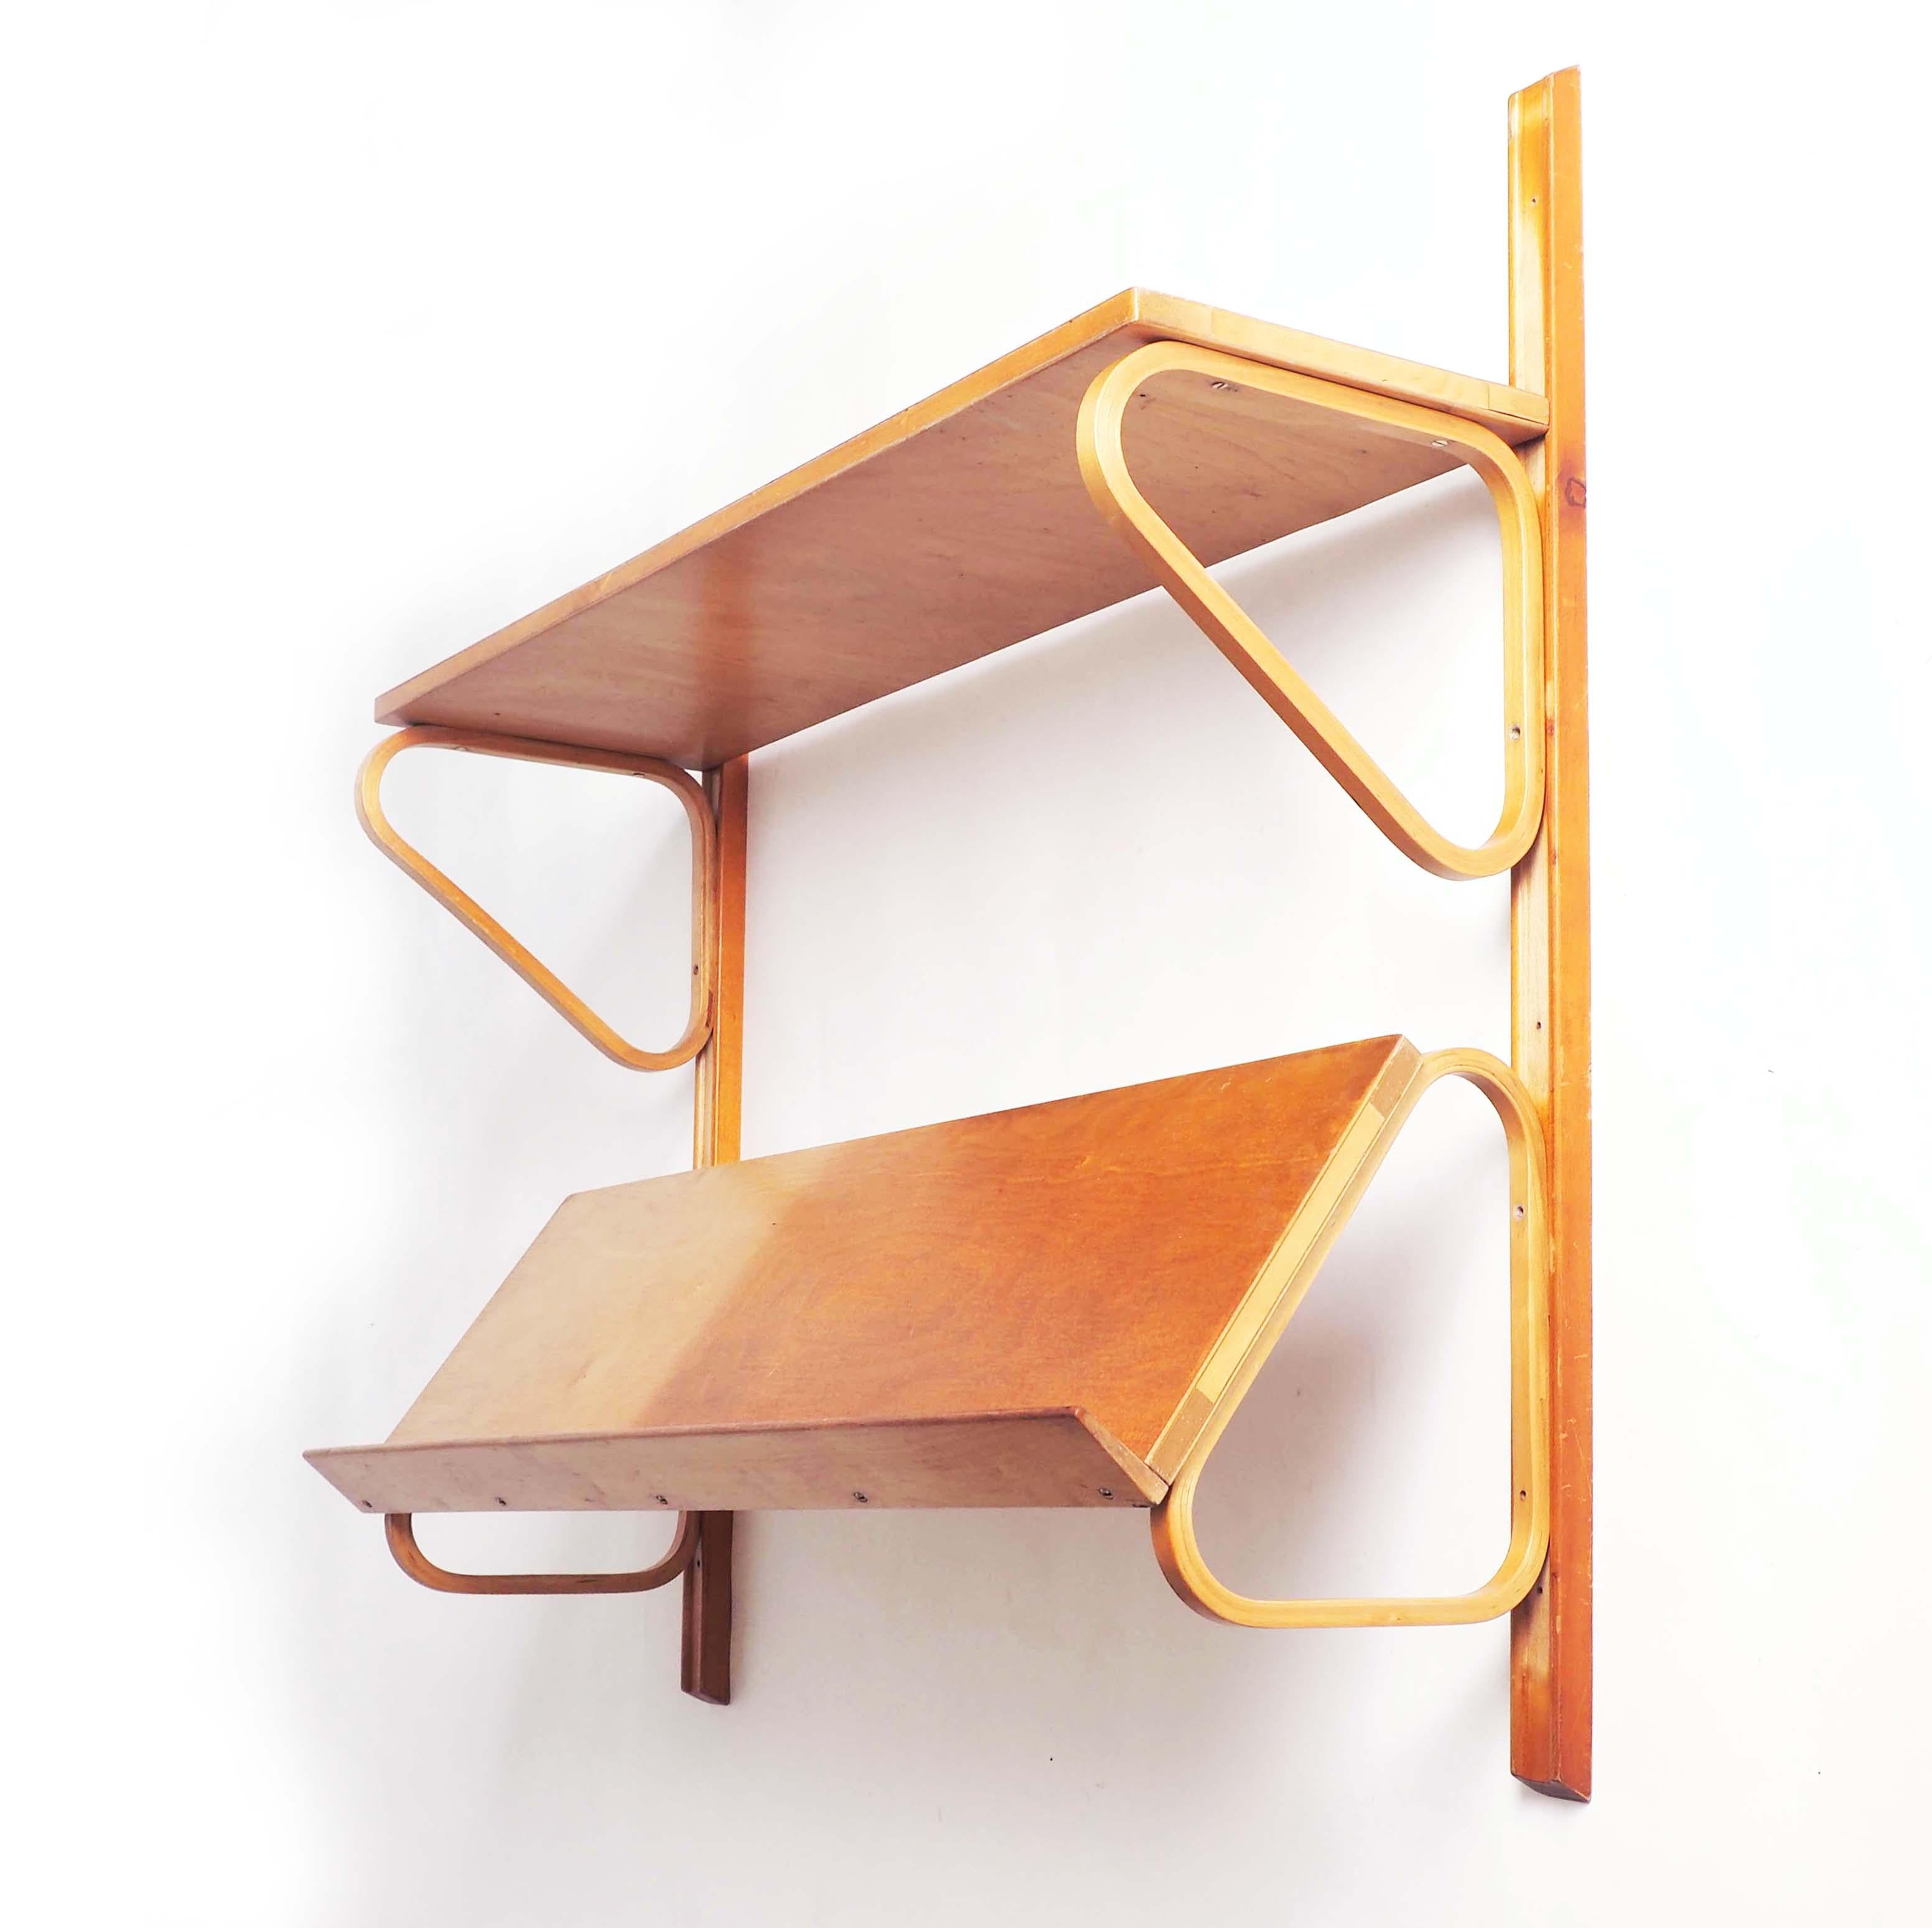 During the 1940´s Alvar Aalto had a production of his furniture in Hedemora, Sweden. This beautiful shelf is from that period. It comes with original wall mounts but can be mounted without them as well. All parts are made in birch.